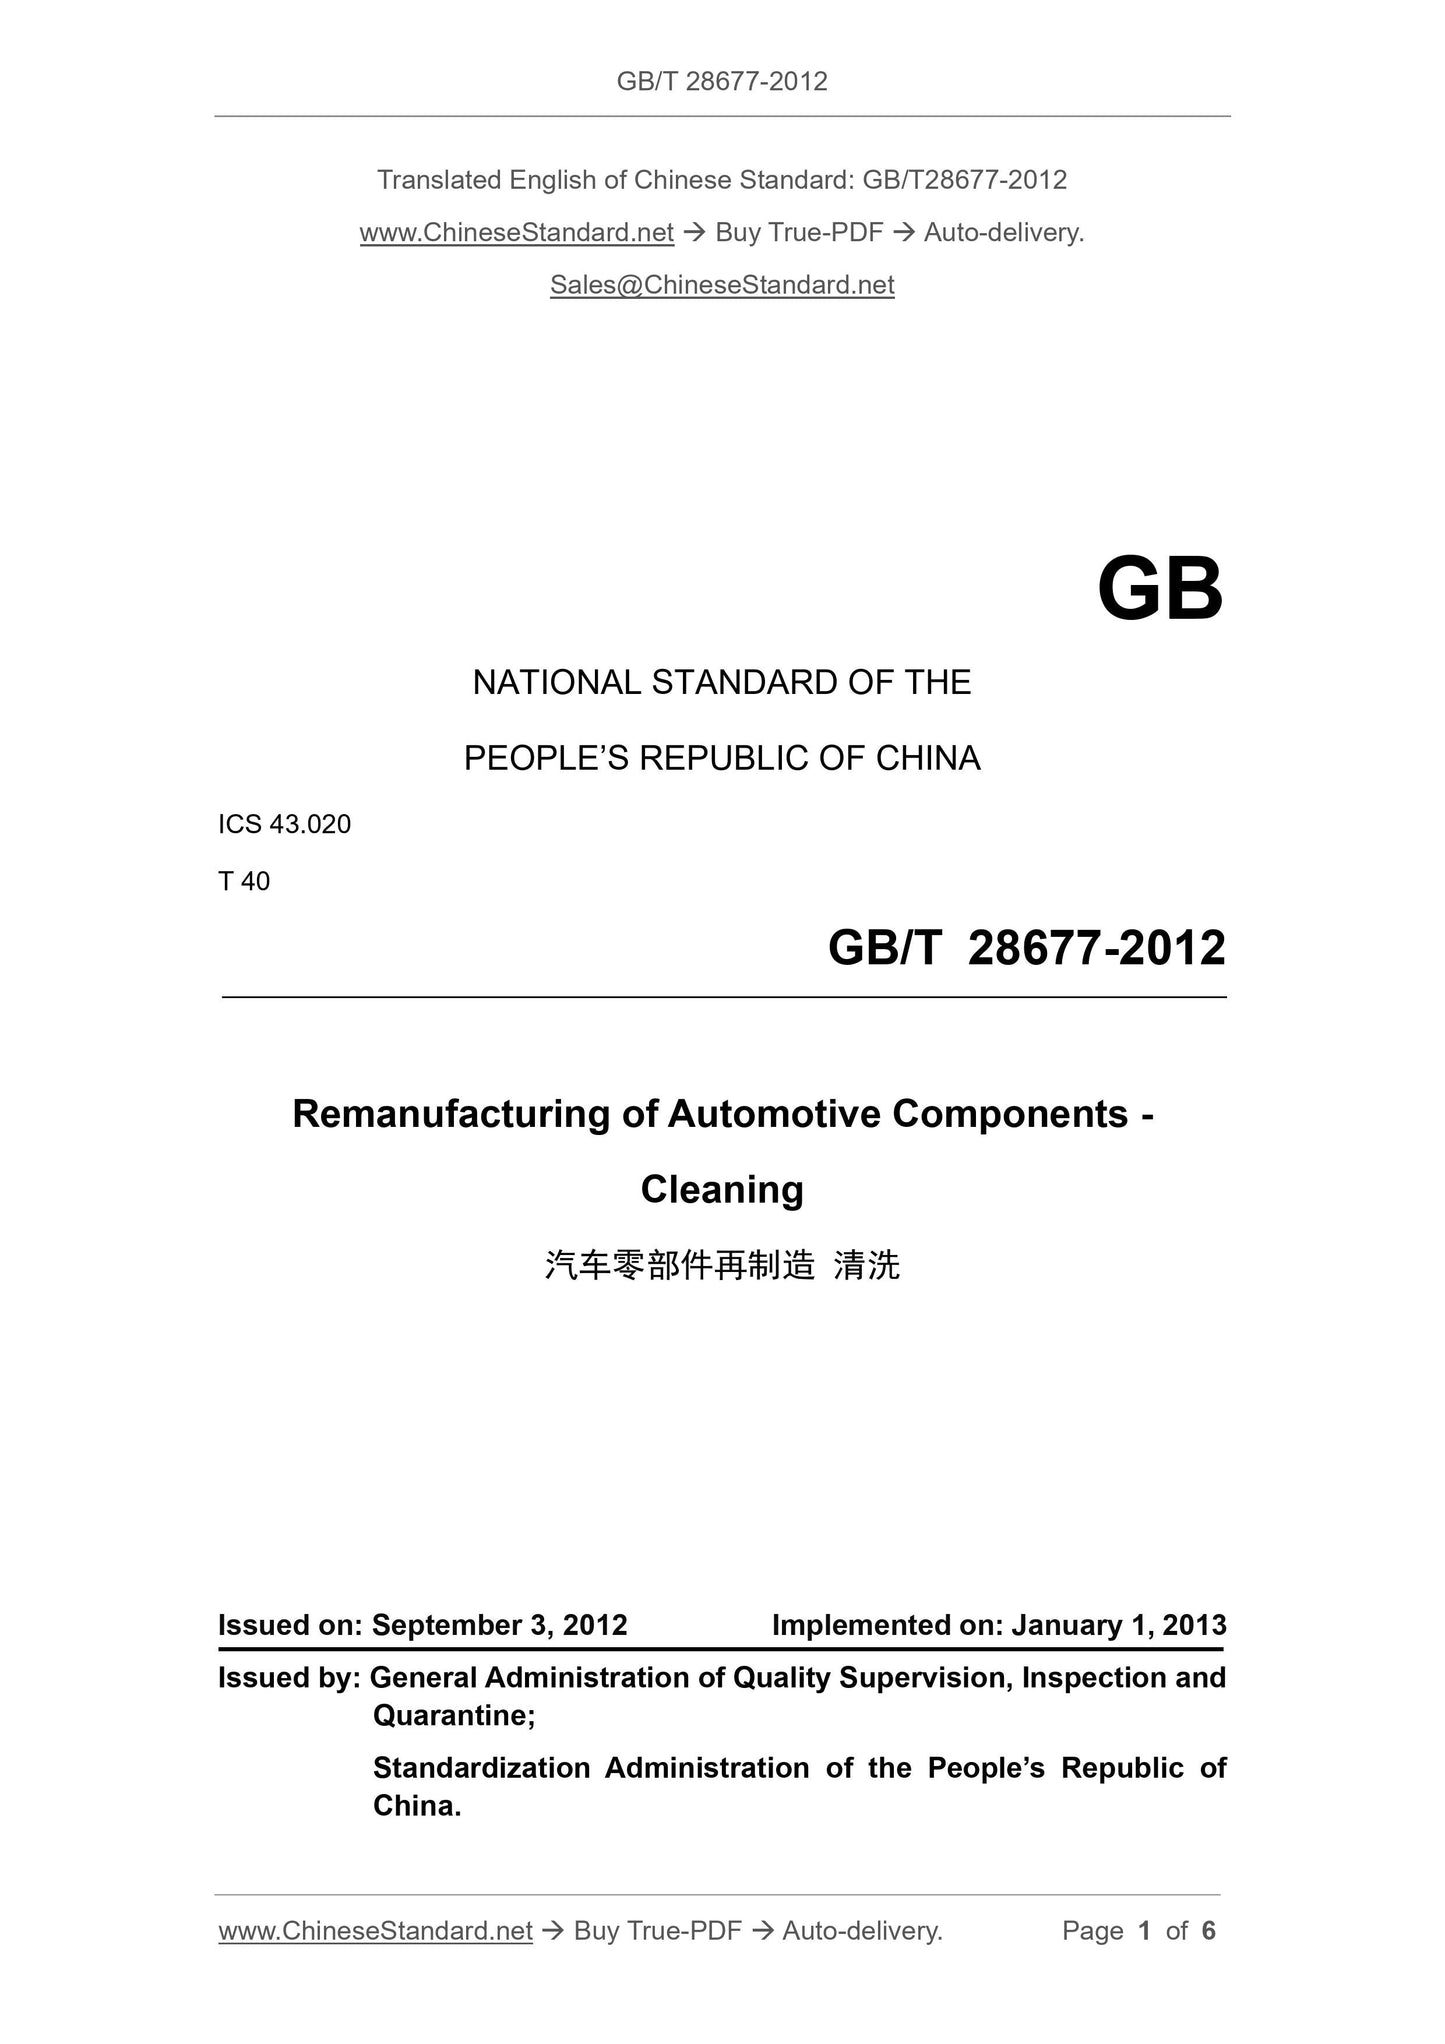 GB/T 28677-2012 Page 1